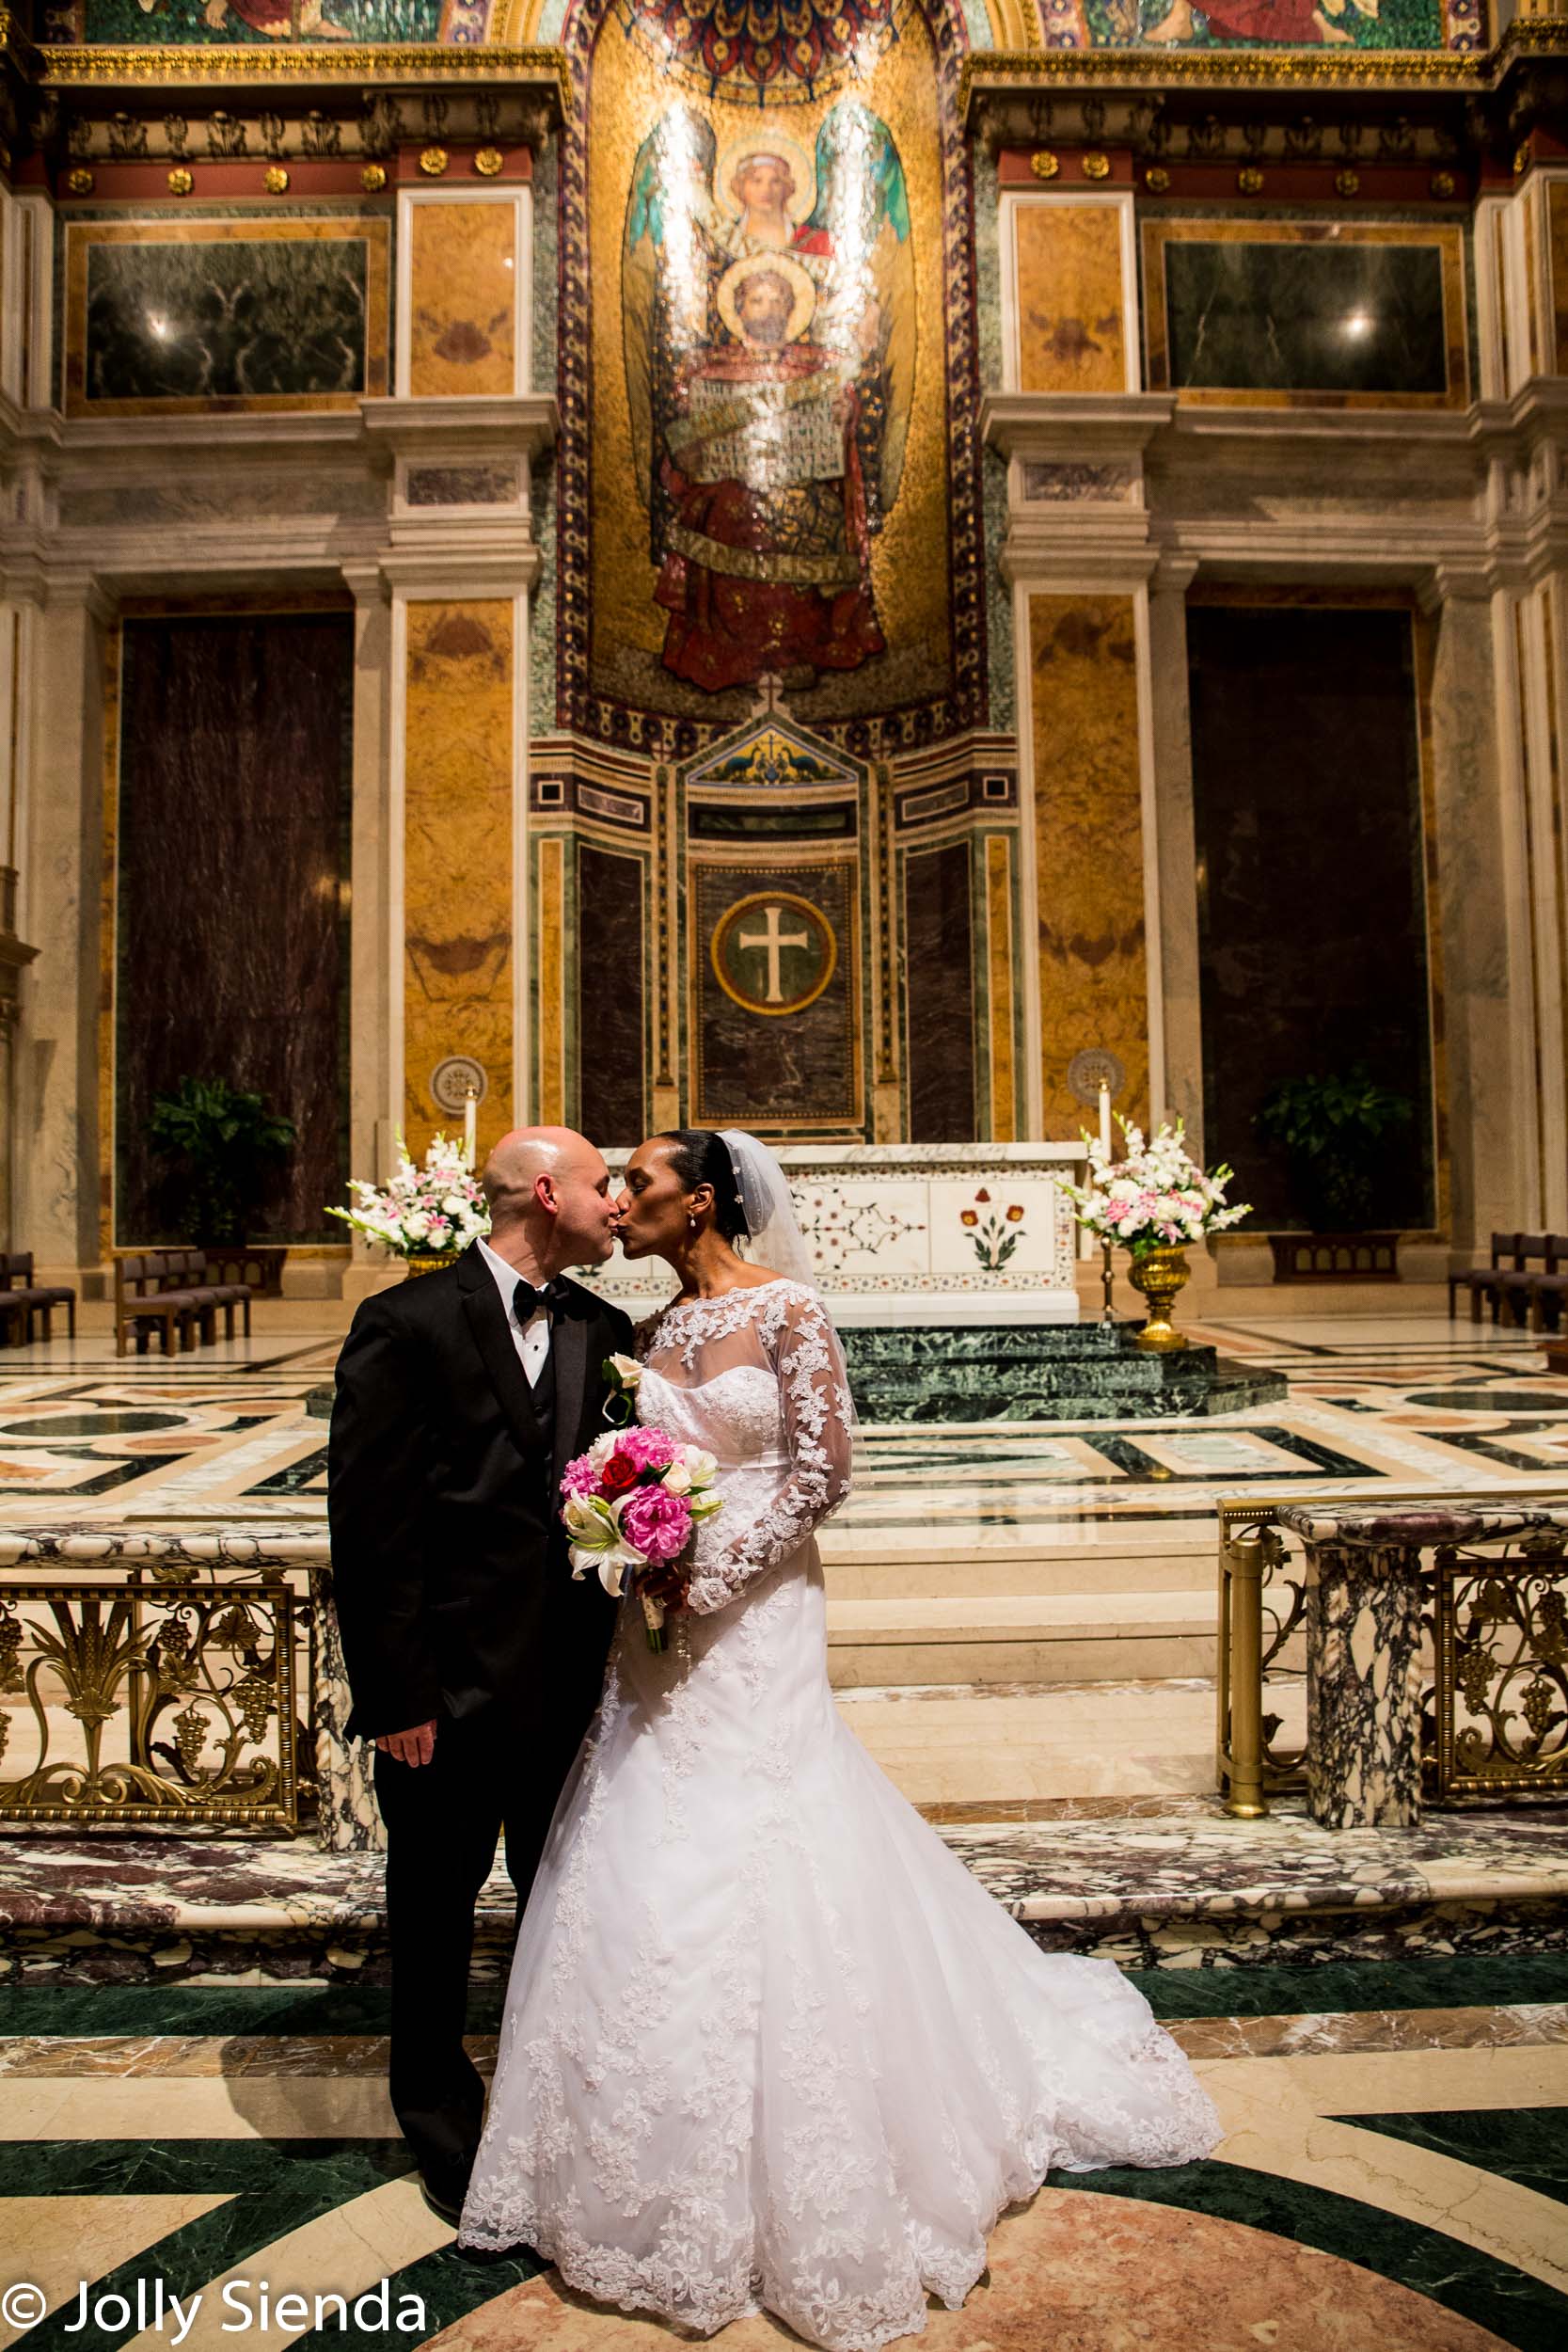 Portrait of a Bride and groom kiss at the wedding alter